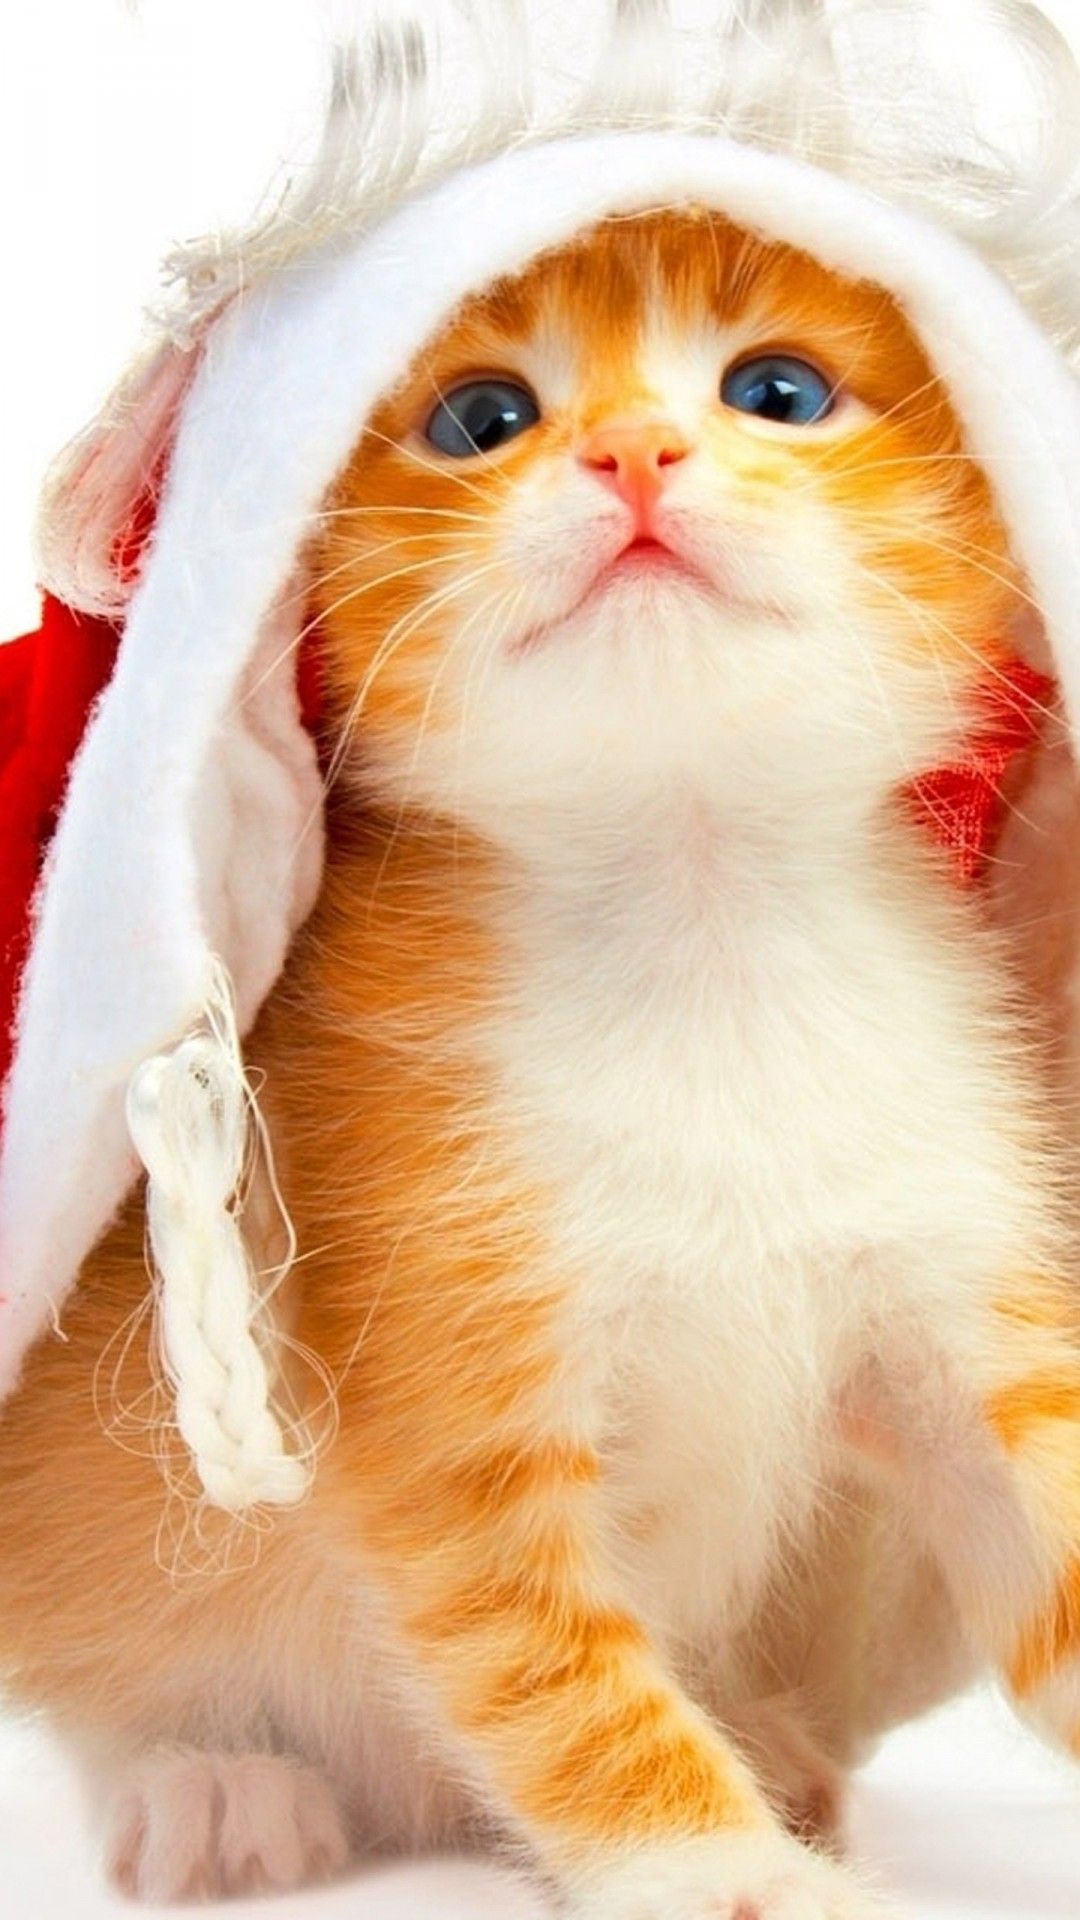 Cute Cats HD Wallpaper for iPhone 7 .wallpaper.picture